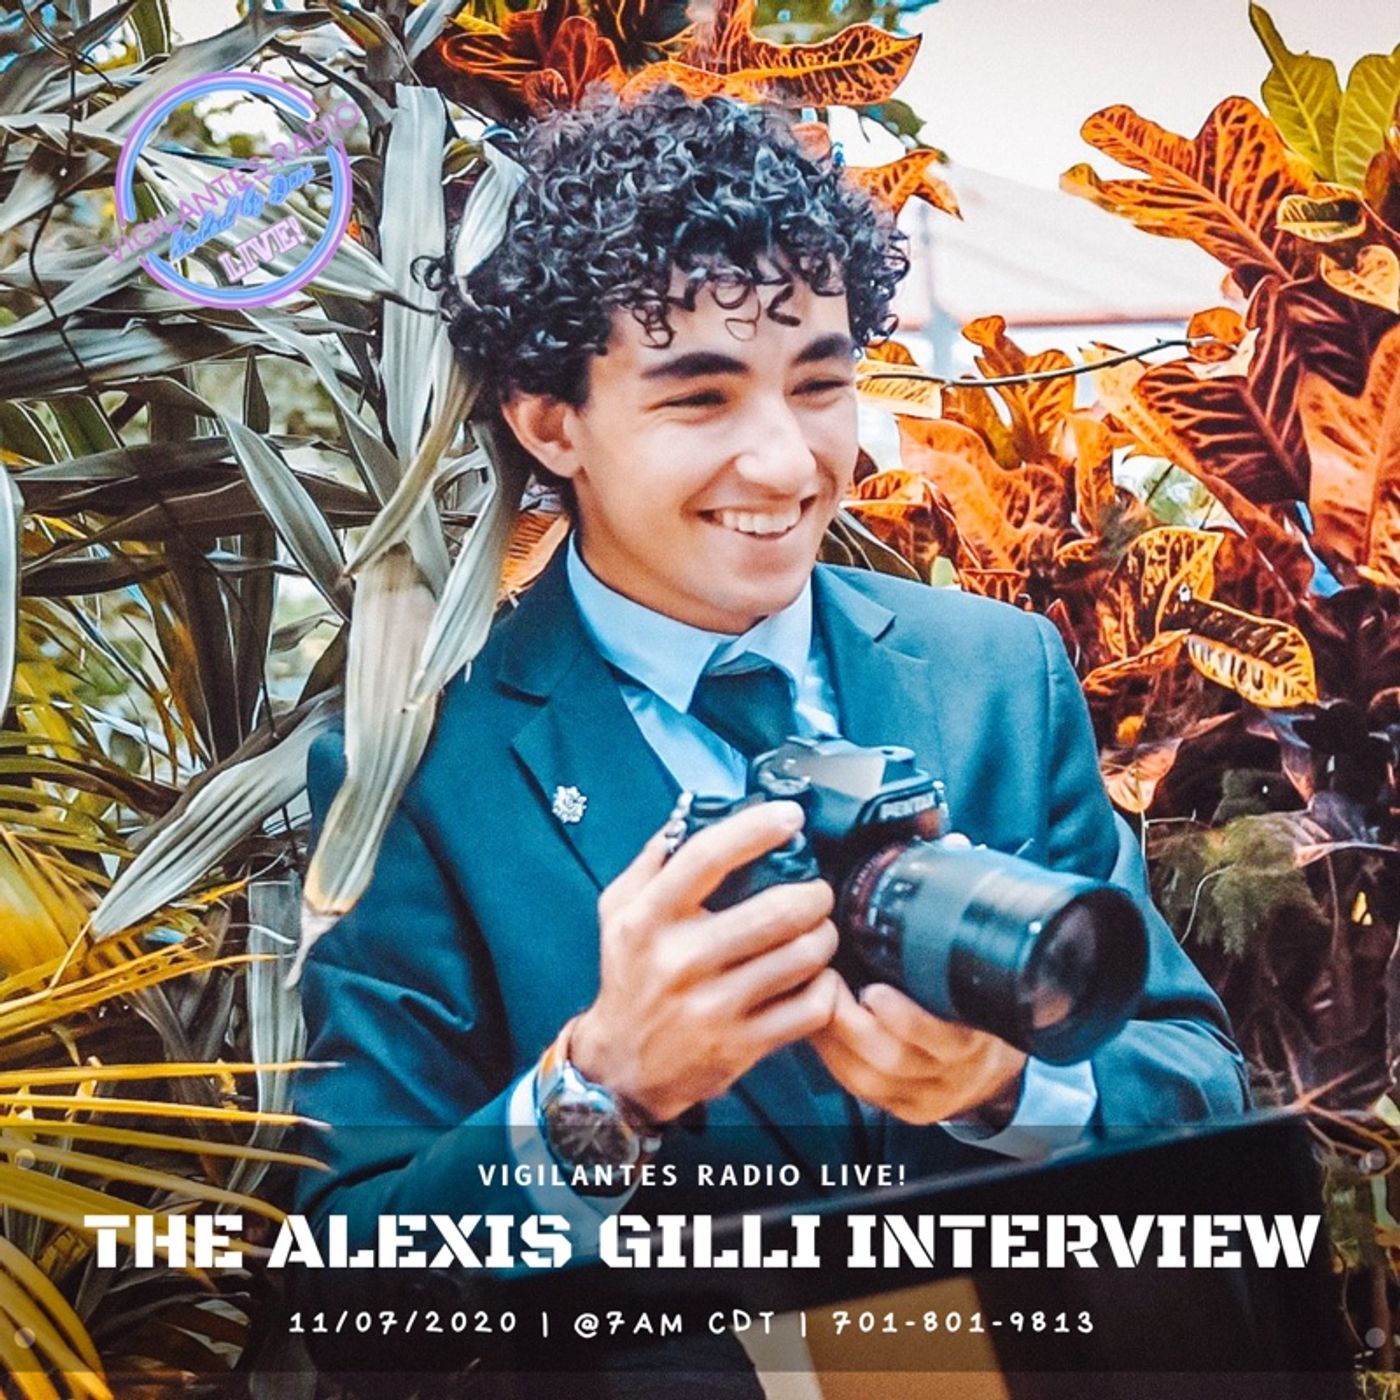 The Alexis Gilli Interview. Image